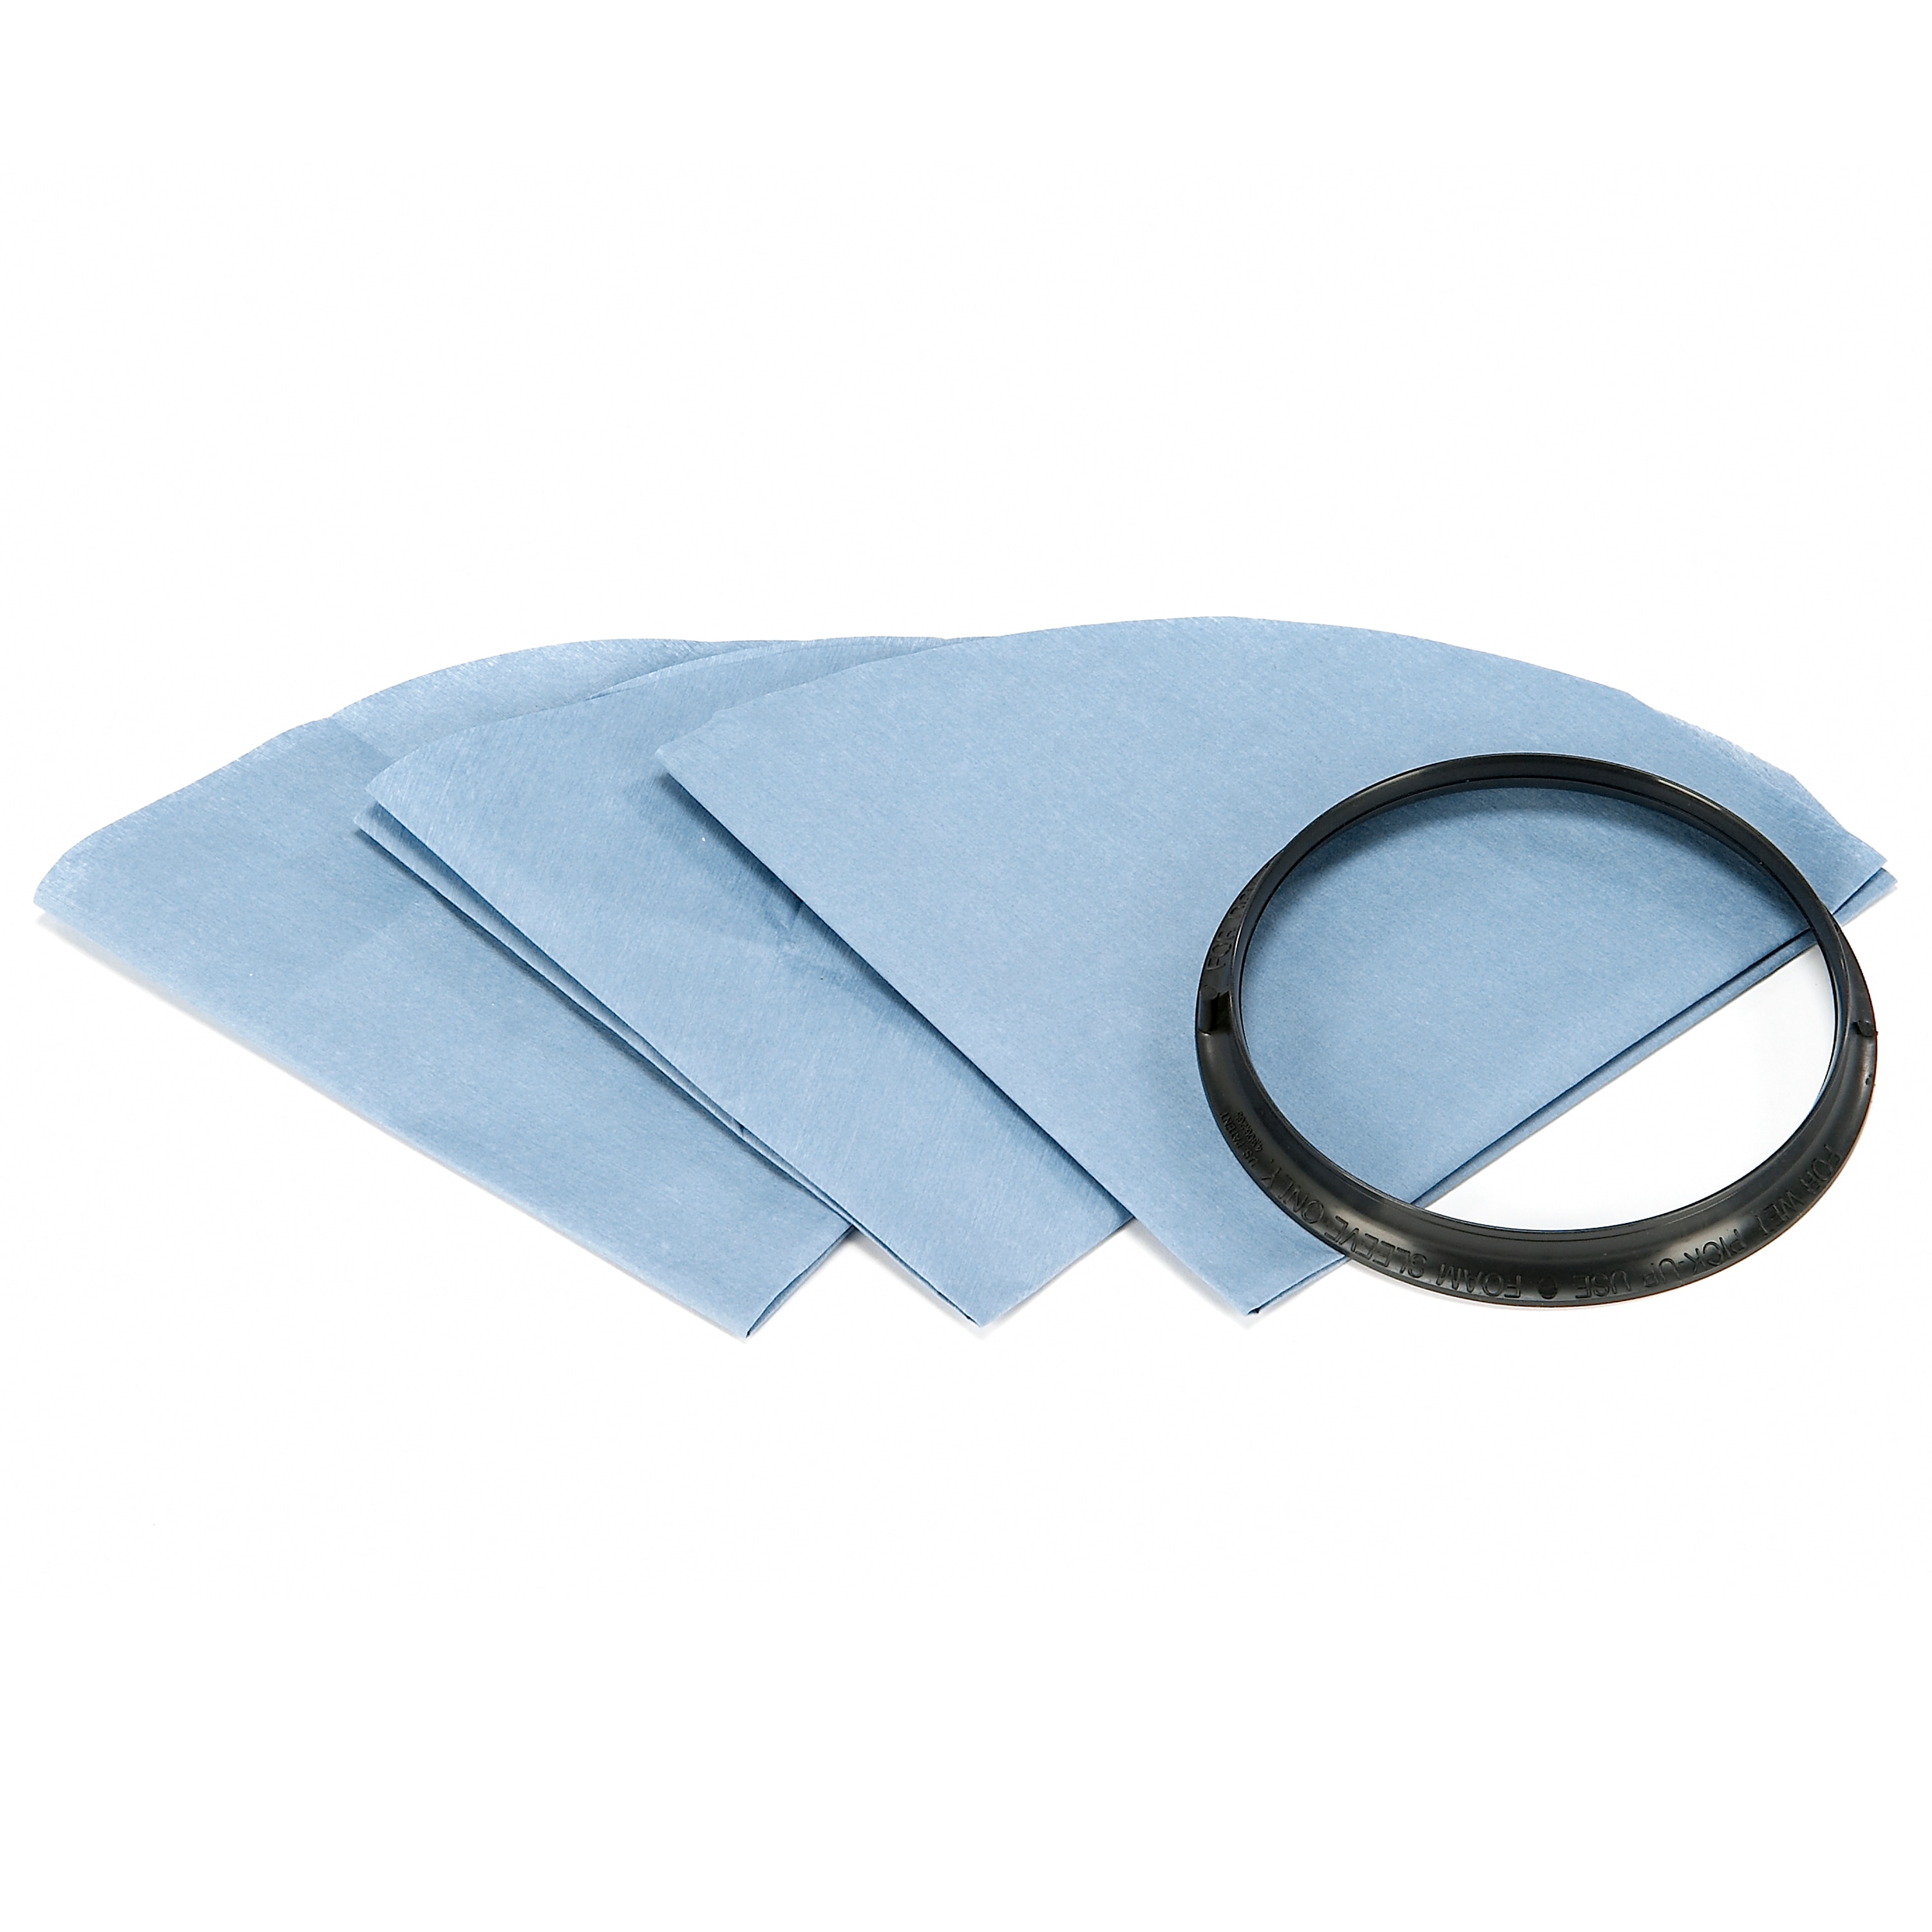 Project Source 0.01-Gallons Tear Resistant Dry Filter Bag